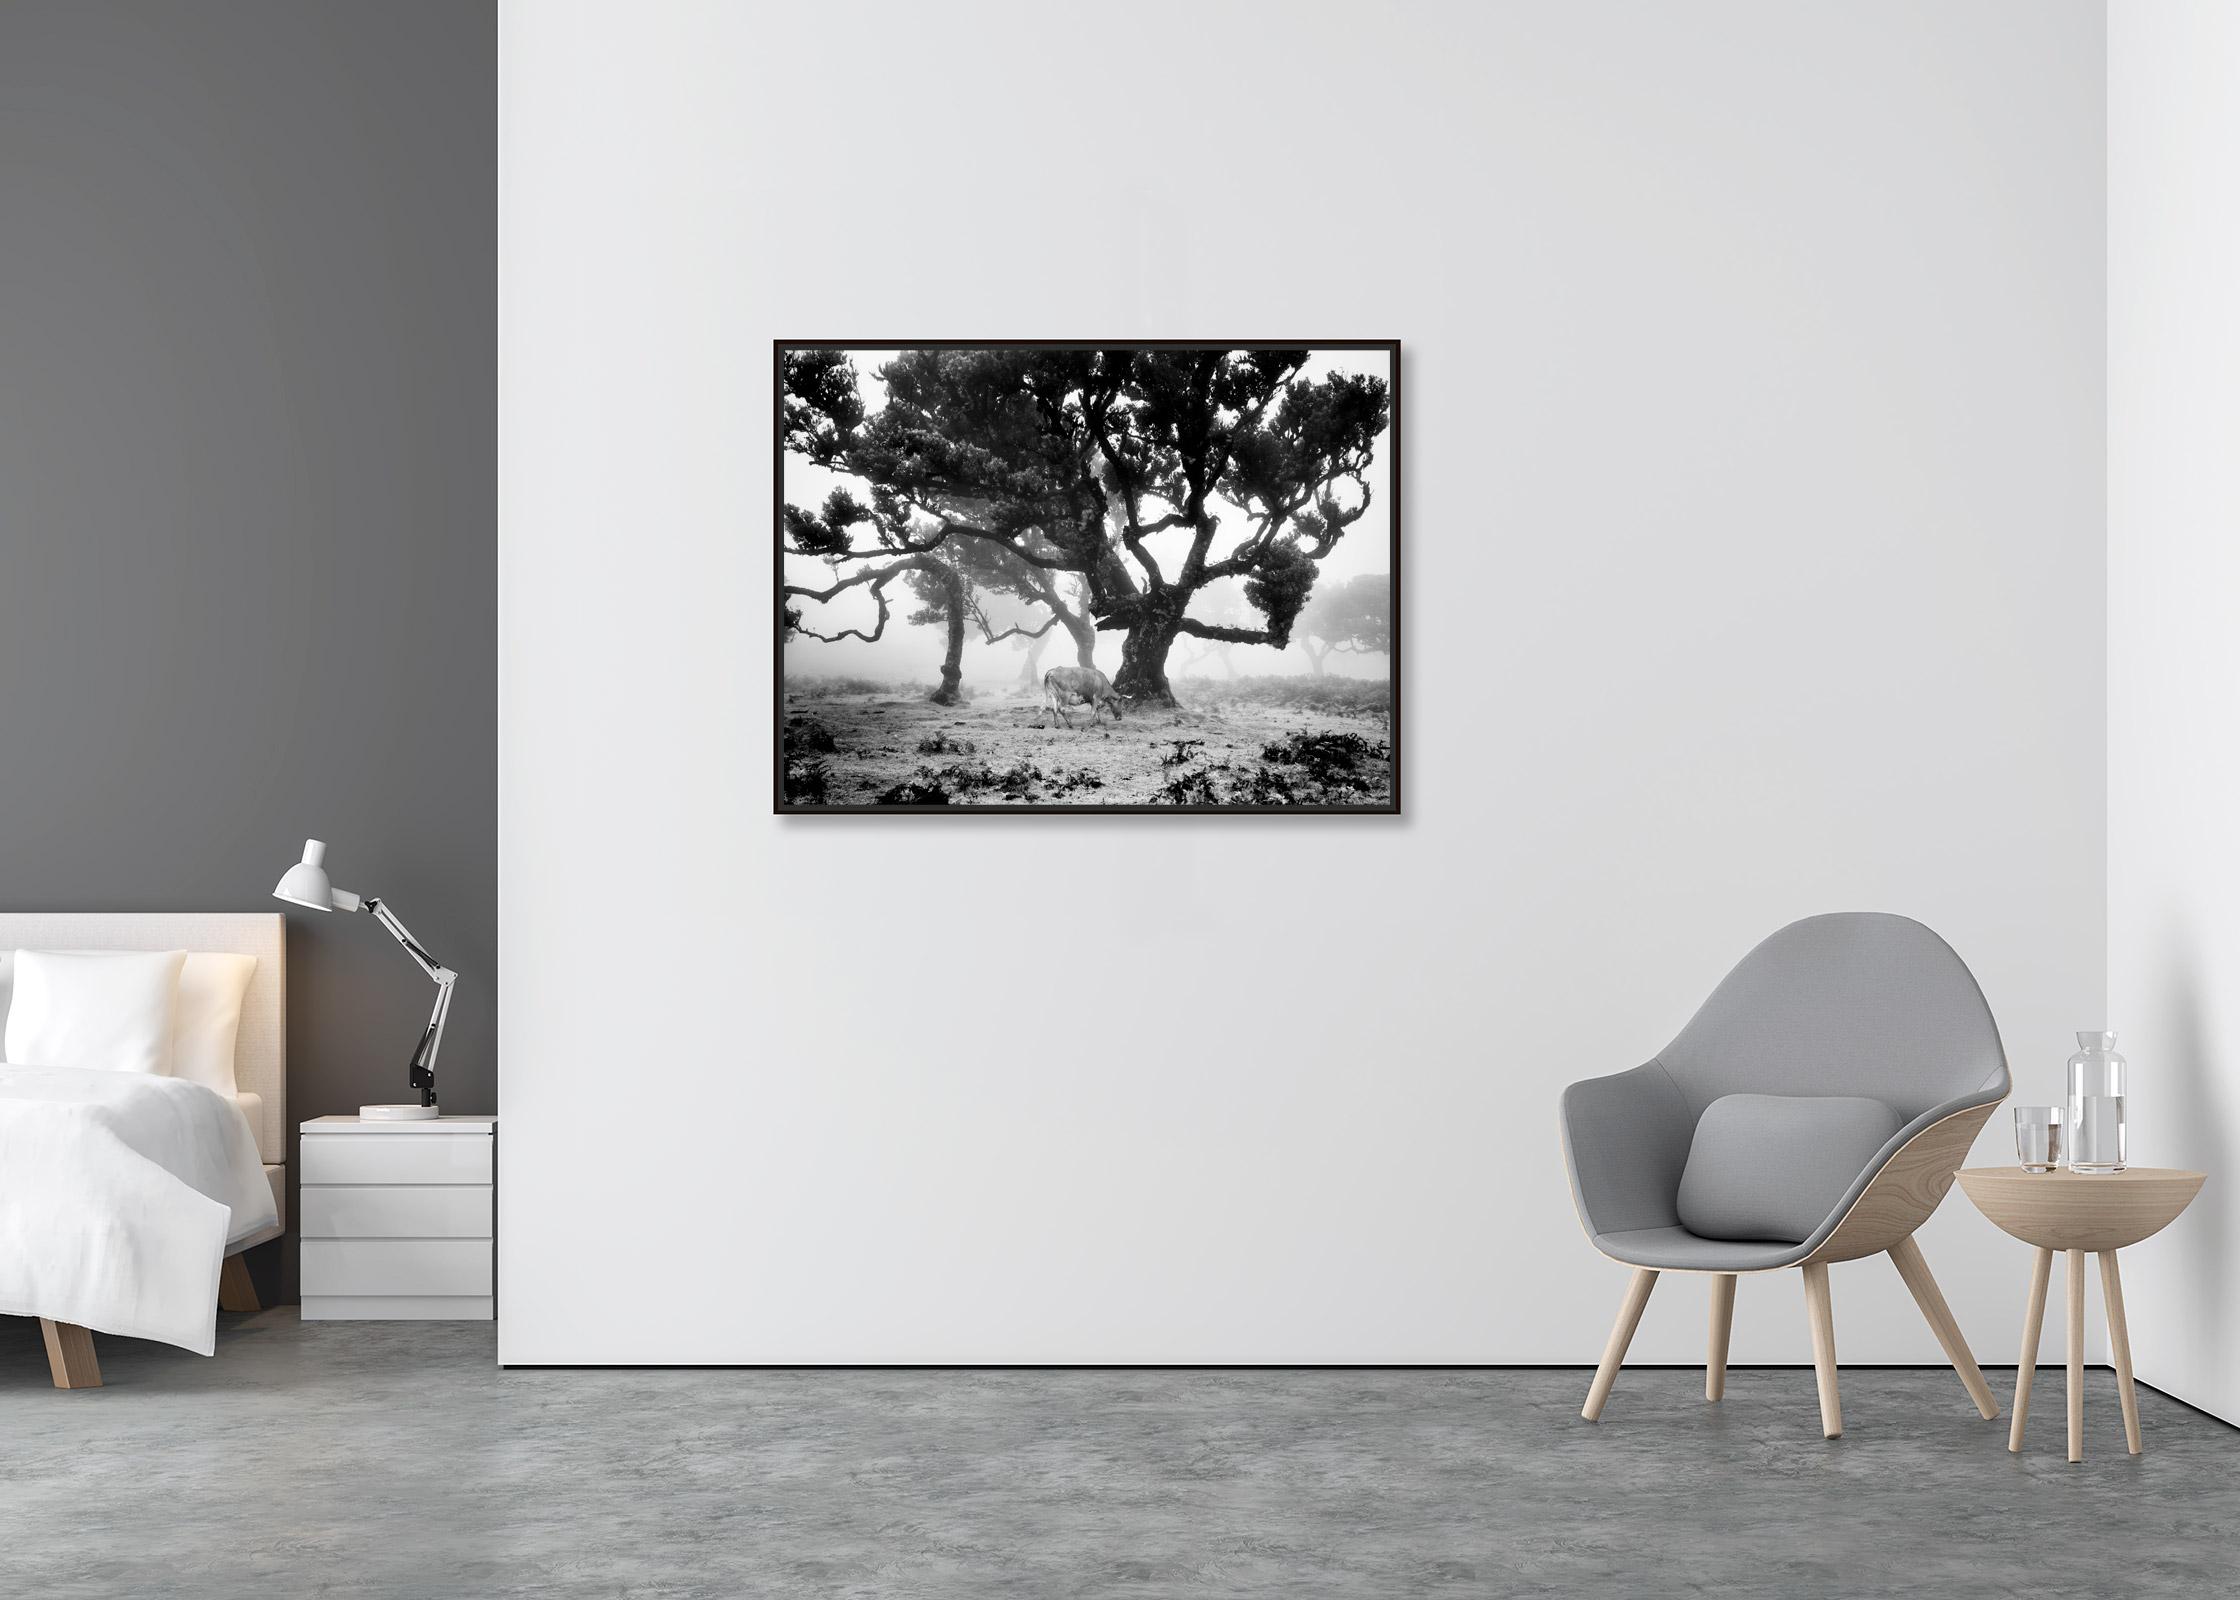 Cows on the foggy pasture, black and white photography, fine art landscape - Contemporary Photograph by Gerald Berghammer